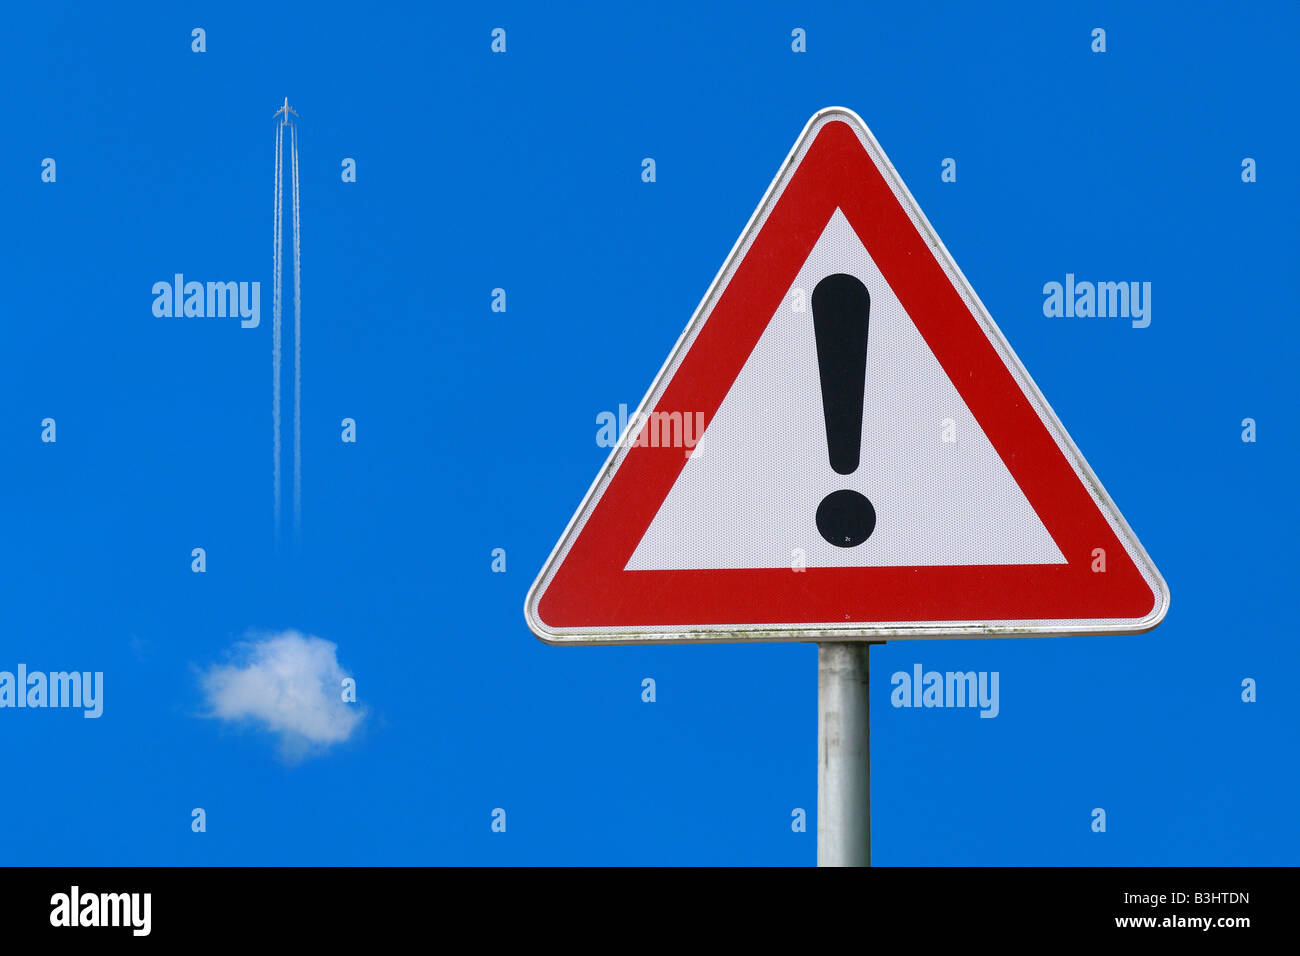 airplane obeying traffic sign, flying an exclamation mark Stock Photo